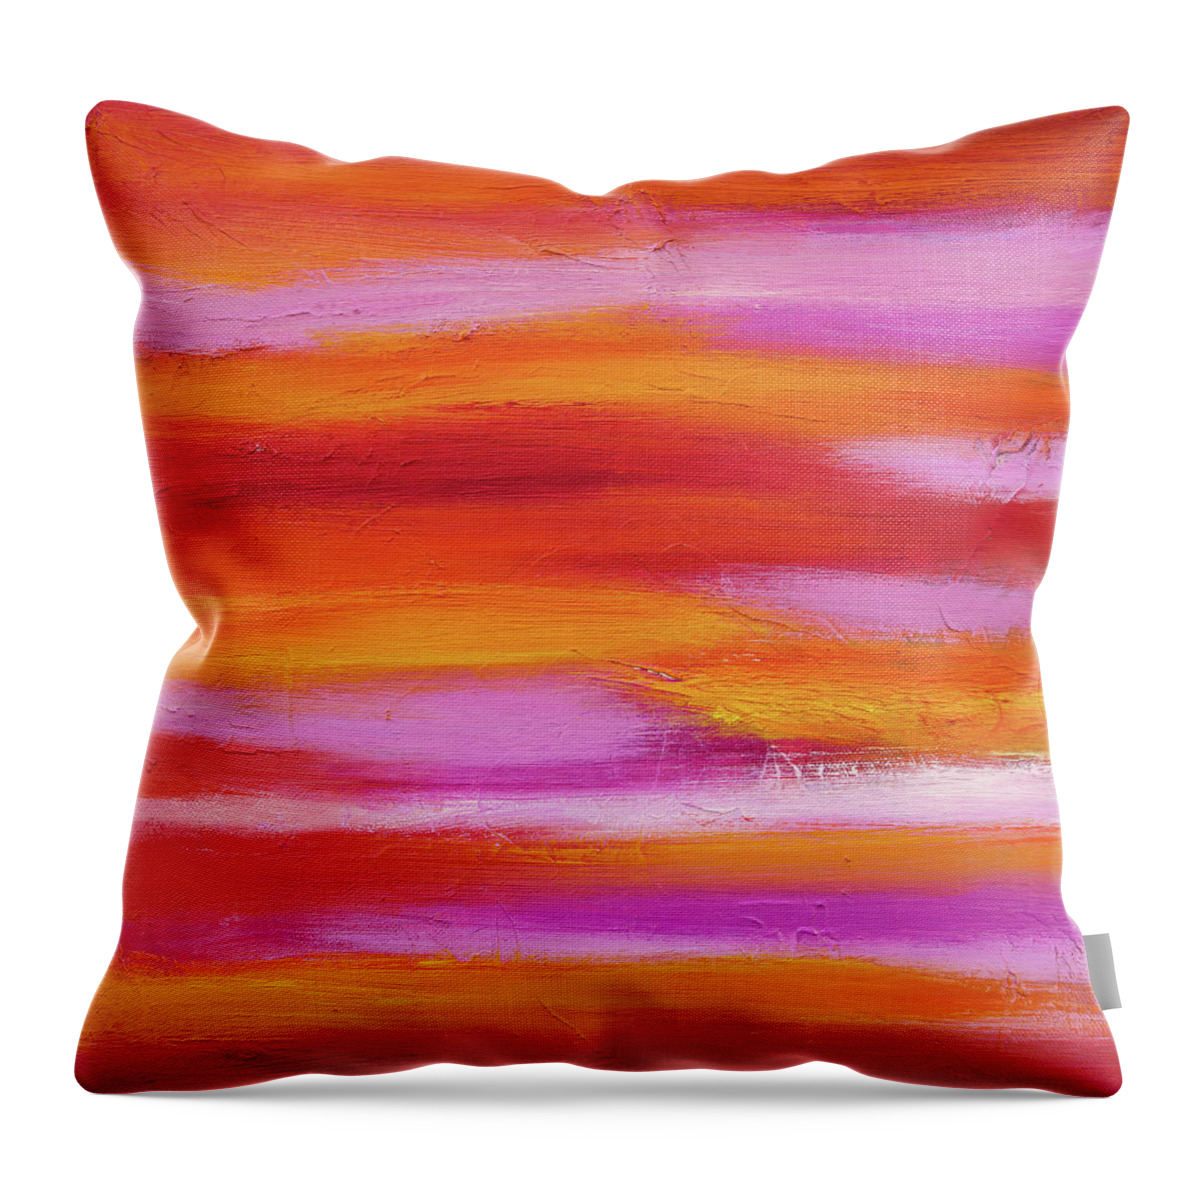 Orange Throw Pillow featuring the painting Orange Waves by Maria Meester